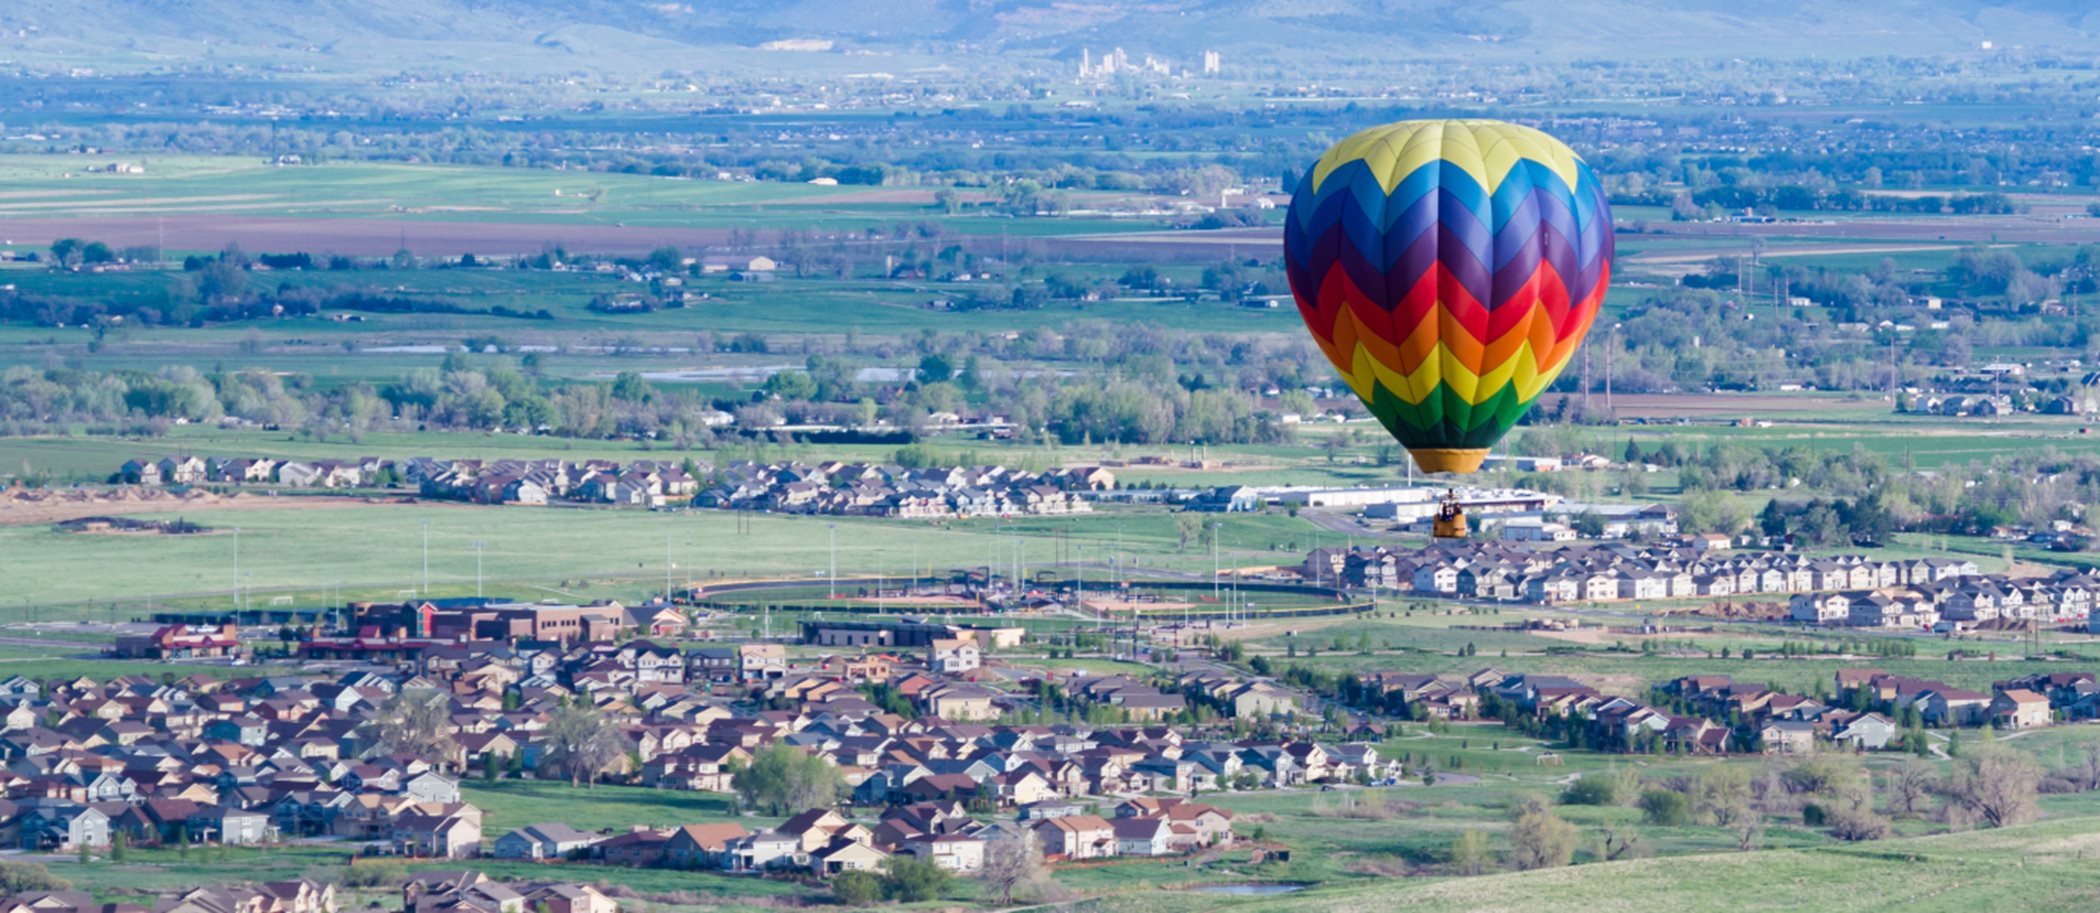 A hot air balloon flying over a town